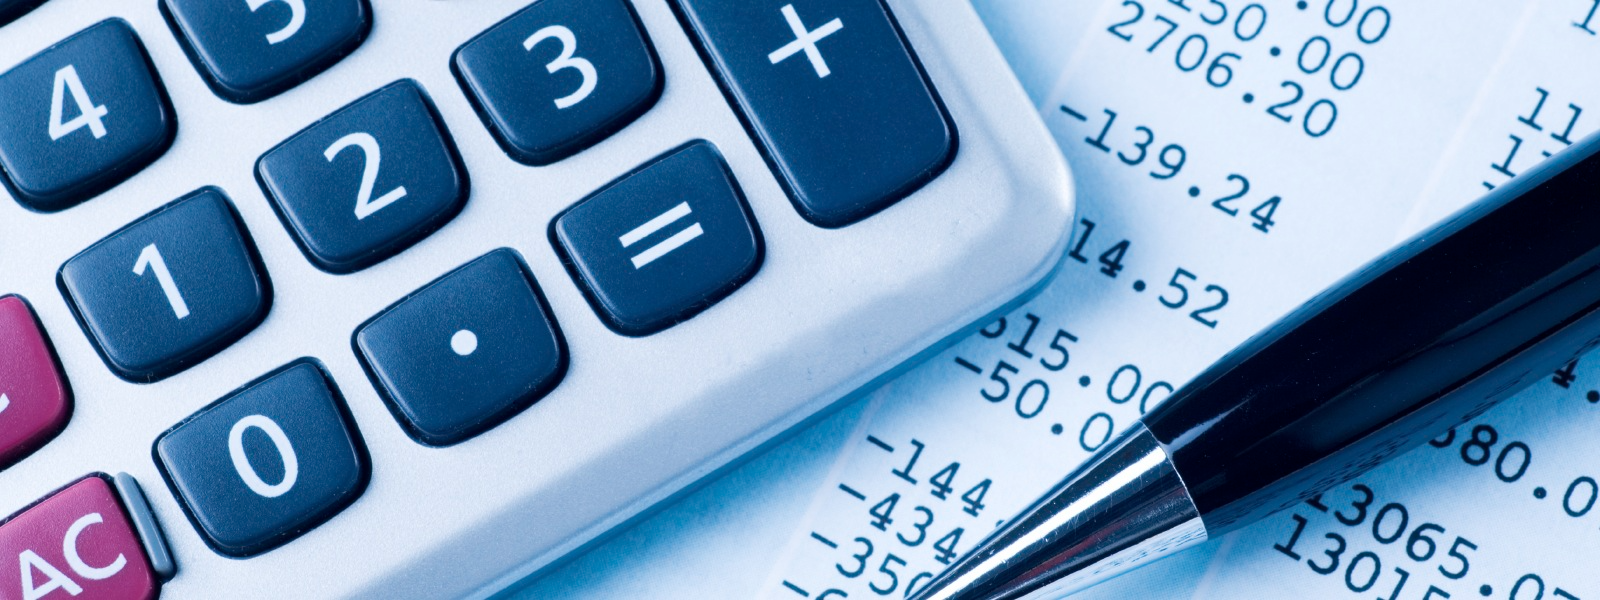 Image of Calculator, receipt in the background and a pen. In reference to Finance